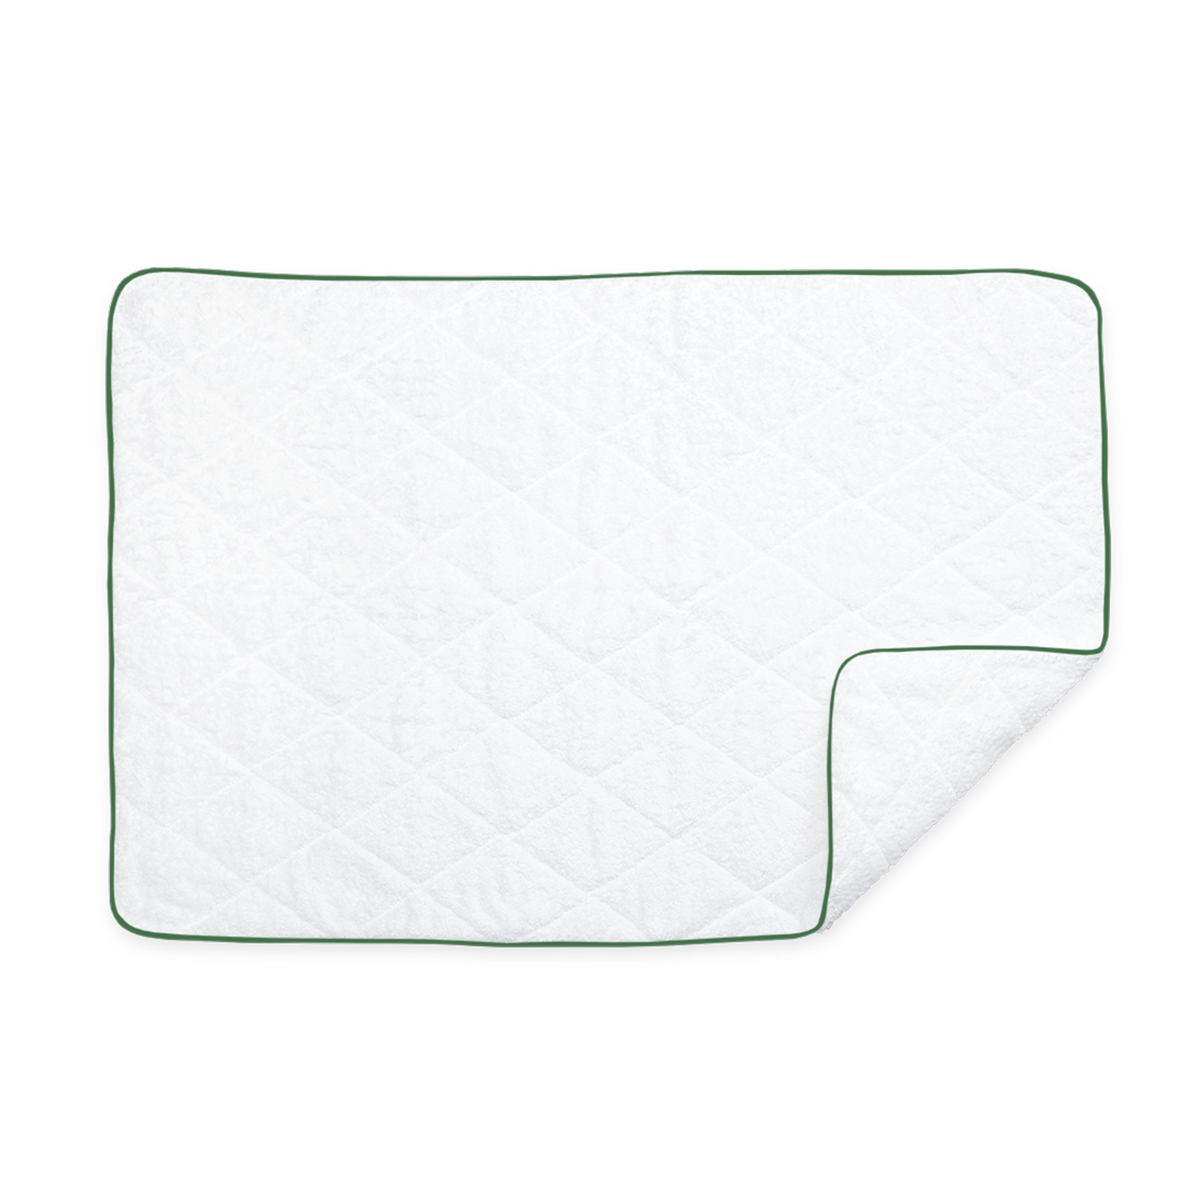 Sample Image of Matouk Cairo Bath Quilted Tub Mat White/Palm